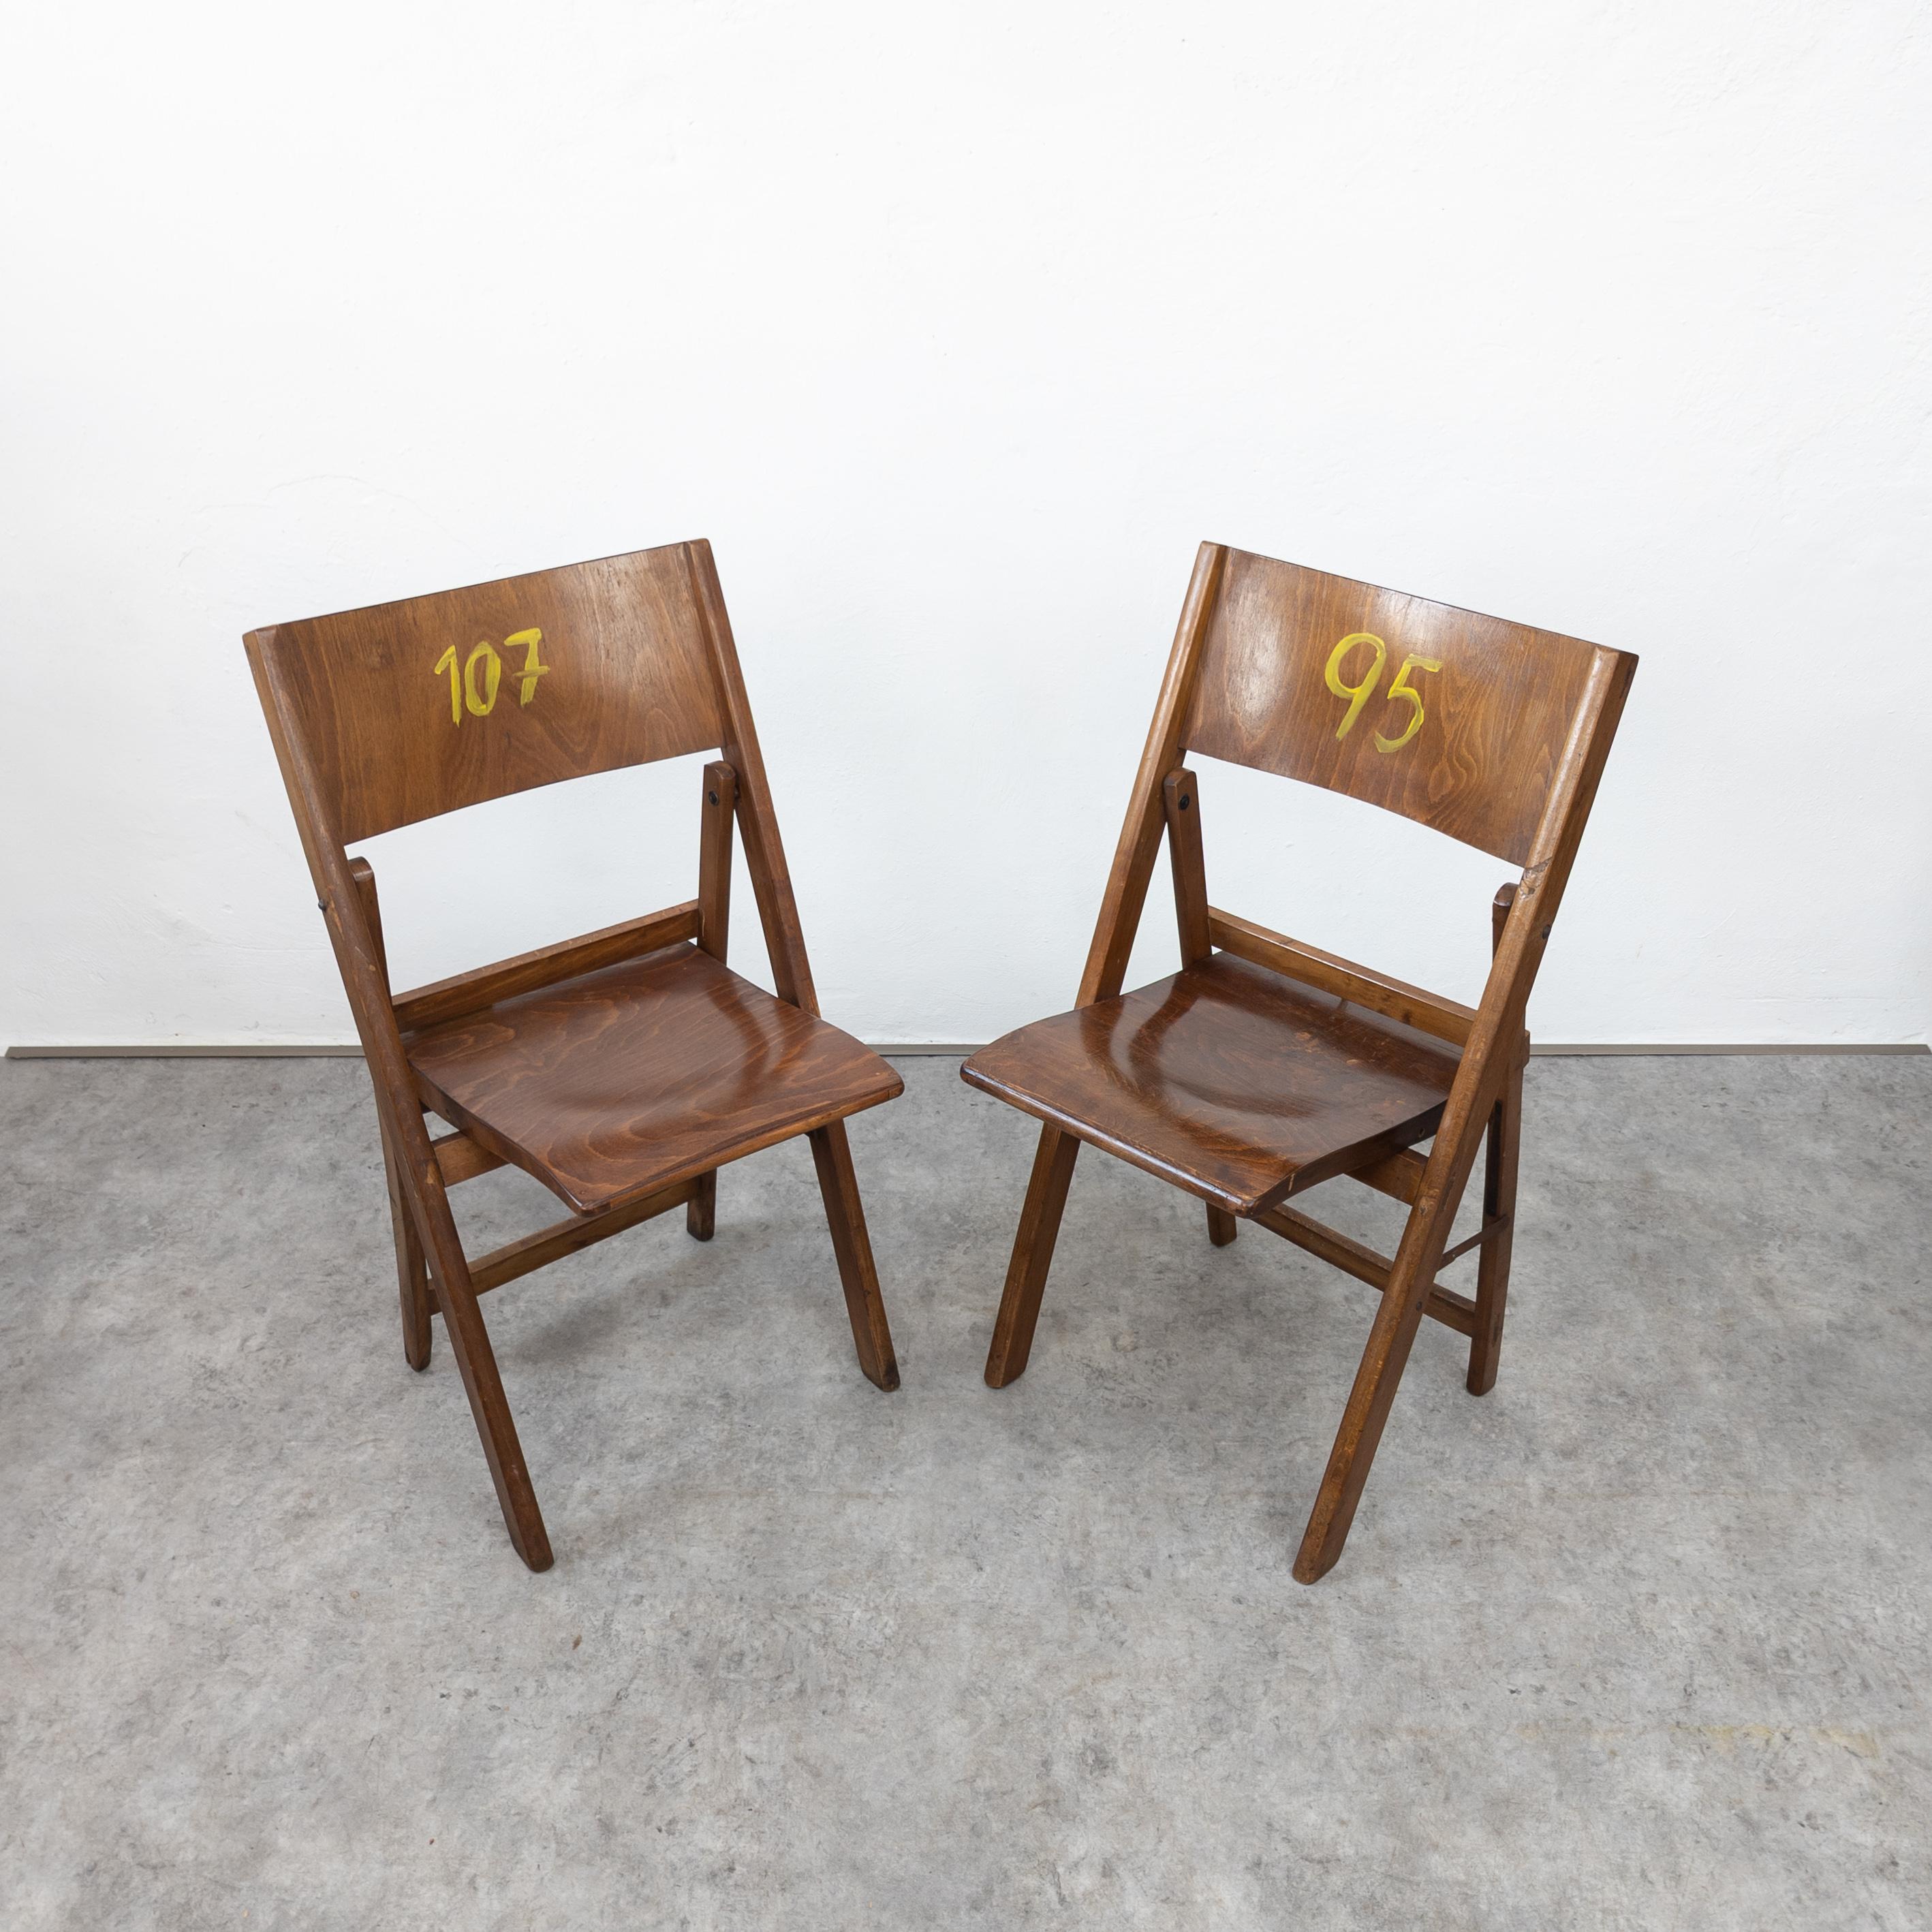 Rare and appealing pair of folding chairs originally from an outdoor cinema are perfect for any modern space. Crafted by Thonet in the 1930s, these chairs remain in good original condition, showcasing a beautiful patina. They are structurally sound,